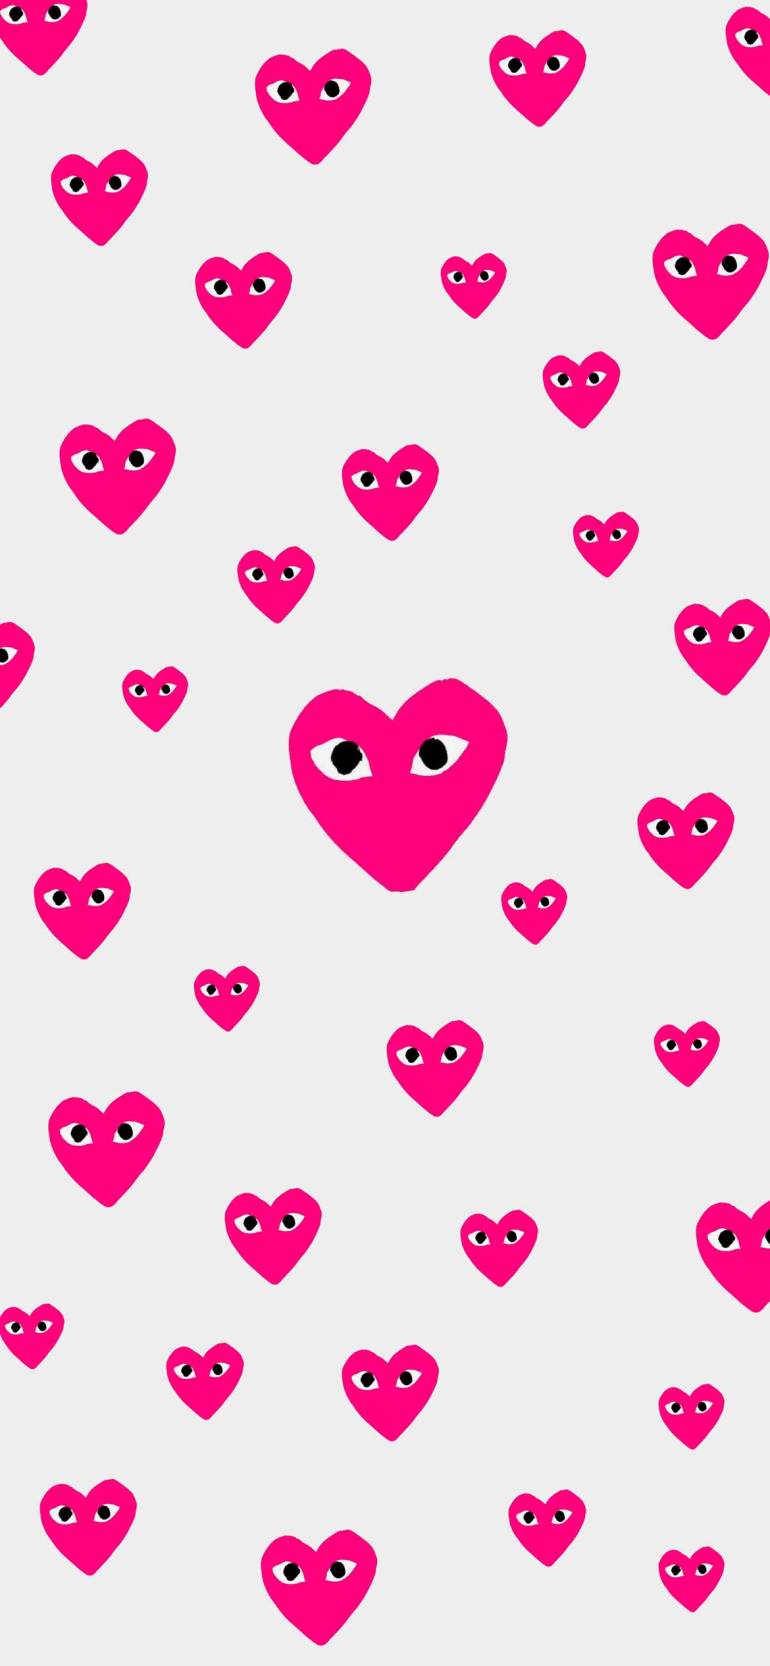 Aesthetic heart wallpaper by Coldpizza69  Download on ZEDGE  7c44